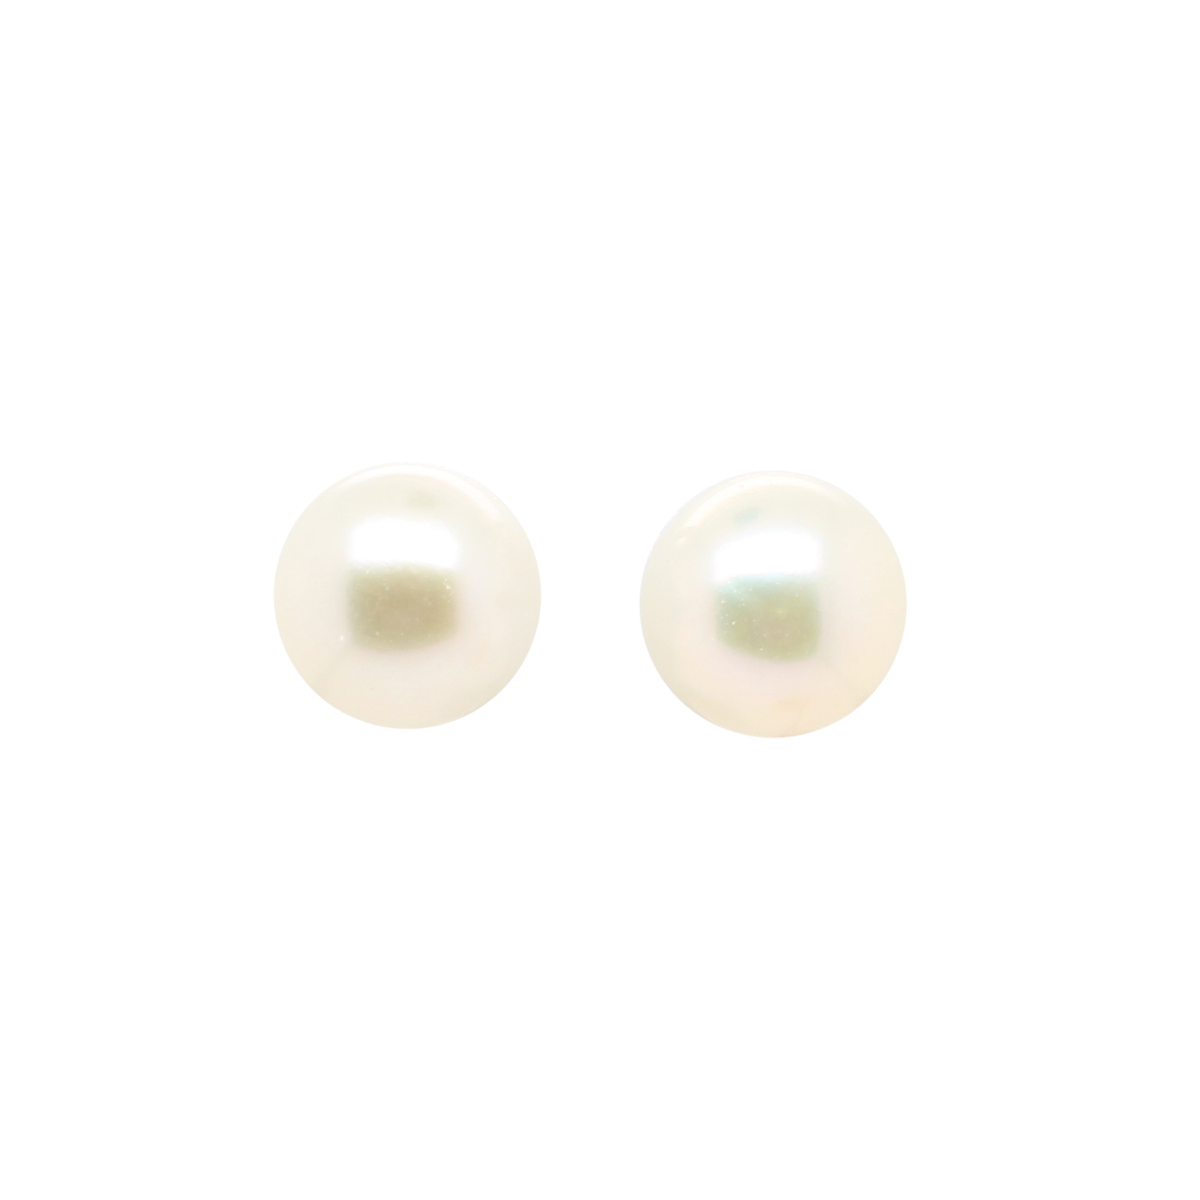 14 Karat White Gold Freshwater Cultured Pearl Earrings  Each Earring Contains One Pearl Measuring 8-9mm  AAA Quality